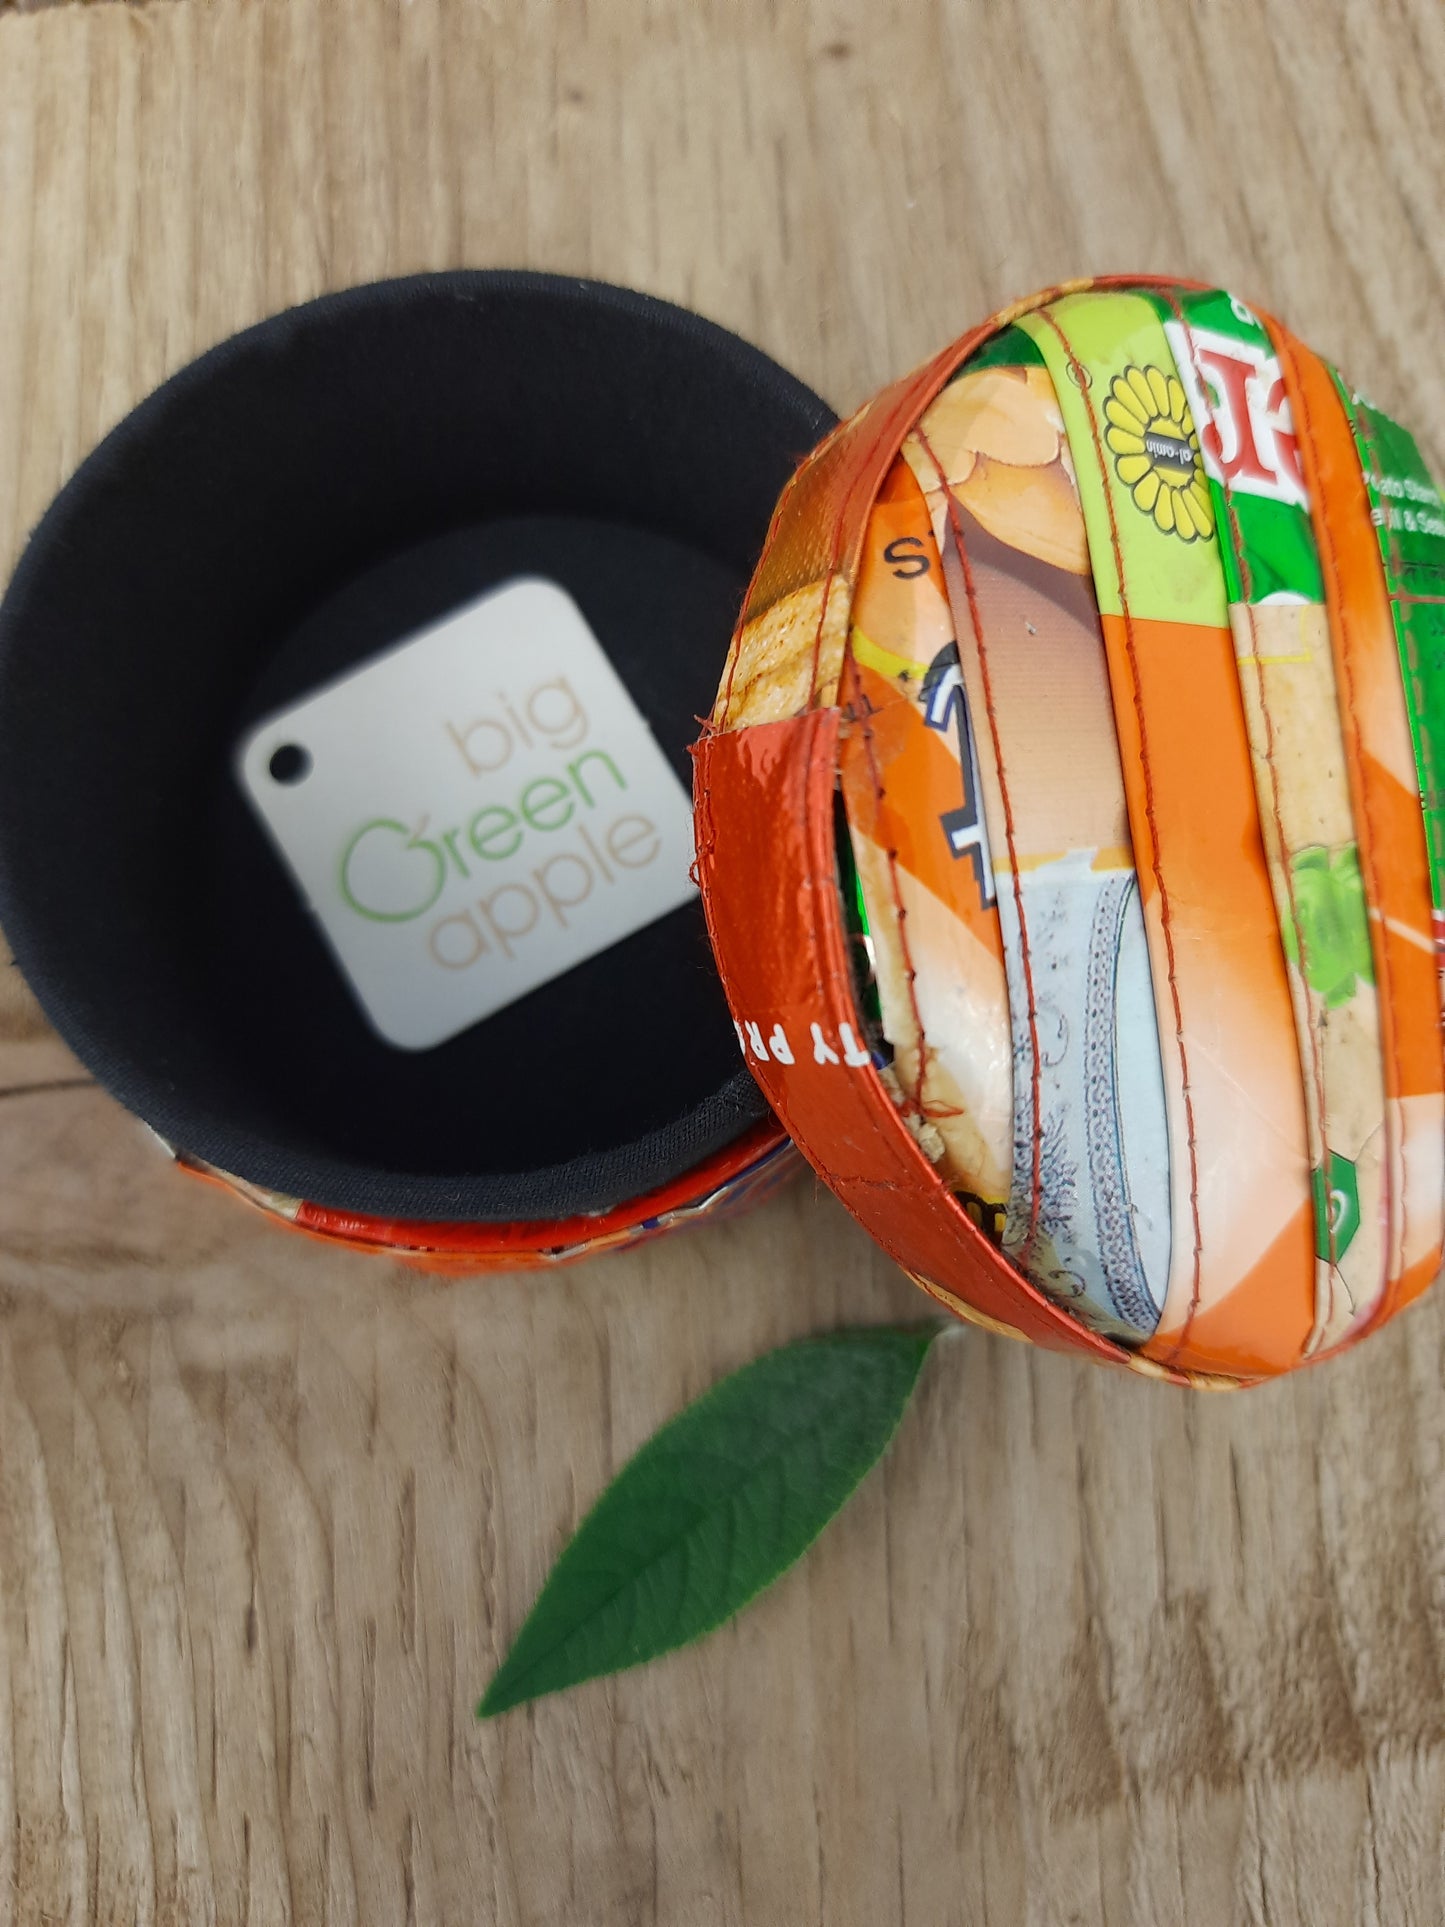 Fair Trade Trinket | Recycled Crisp Packets | Ethical Gifts UK | Jewellery Box | Eco Friendly Items